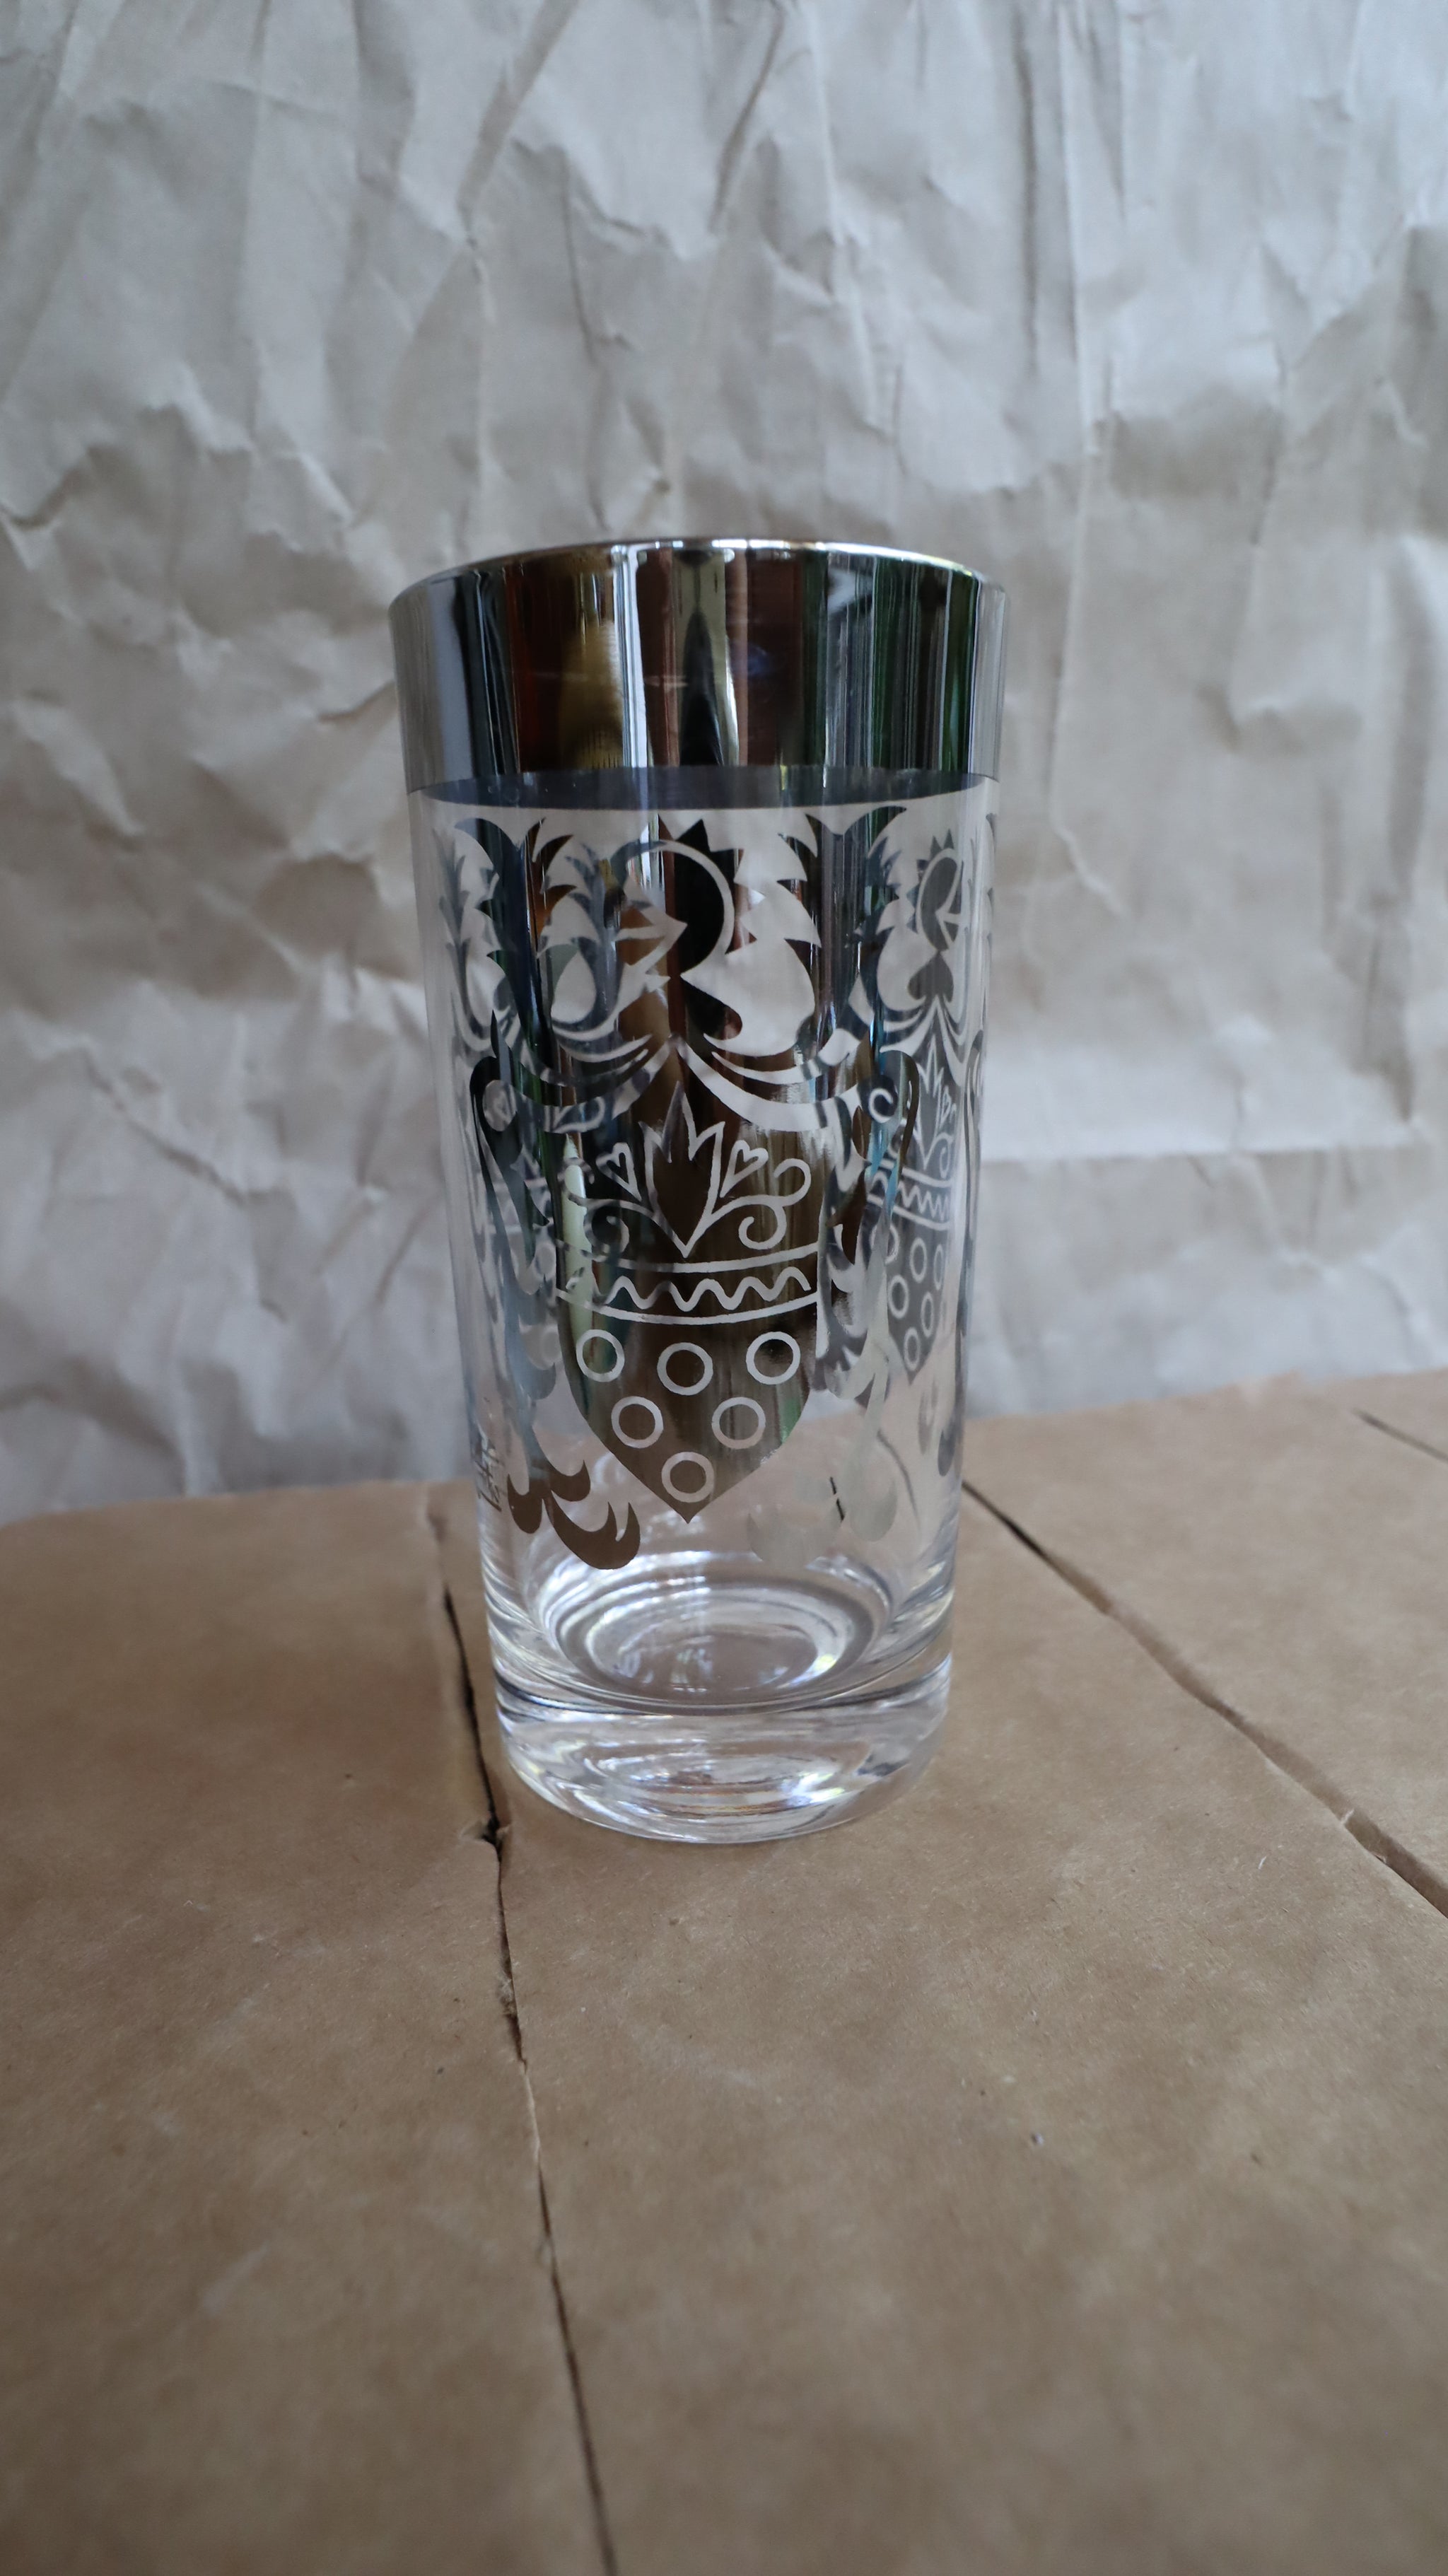 1960s Kimiko Silvercrest Knight Coat of Arms Highball Glasses - Set of 4